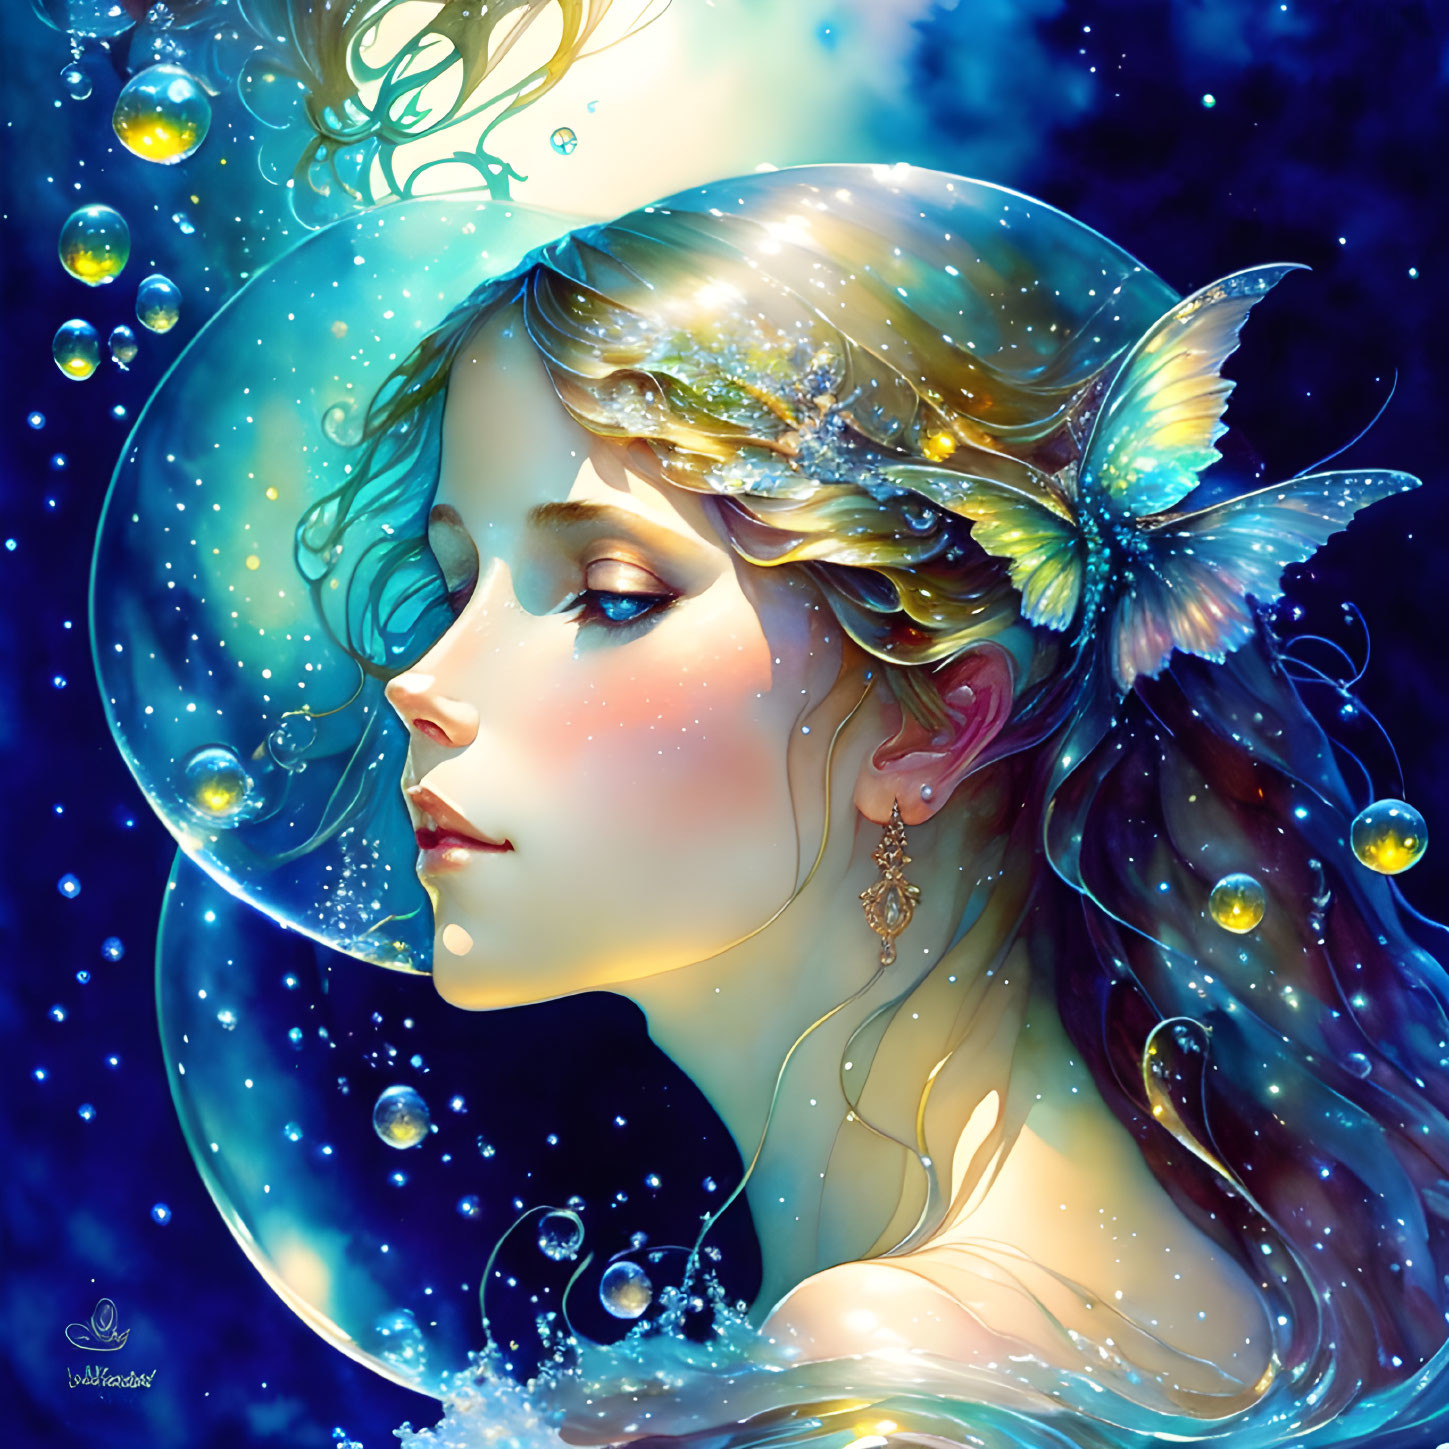 Fantasy illustration of ethereal woman with orbs, butterfly, and celestial background